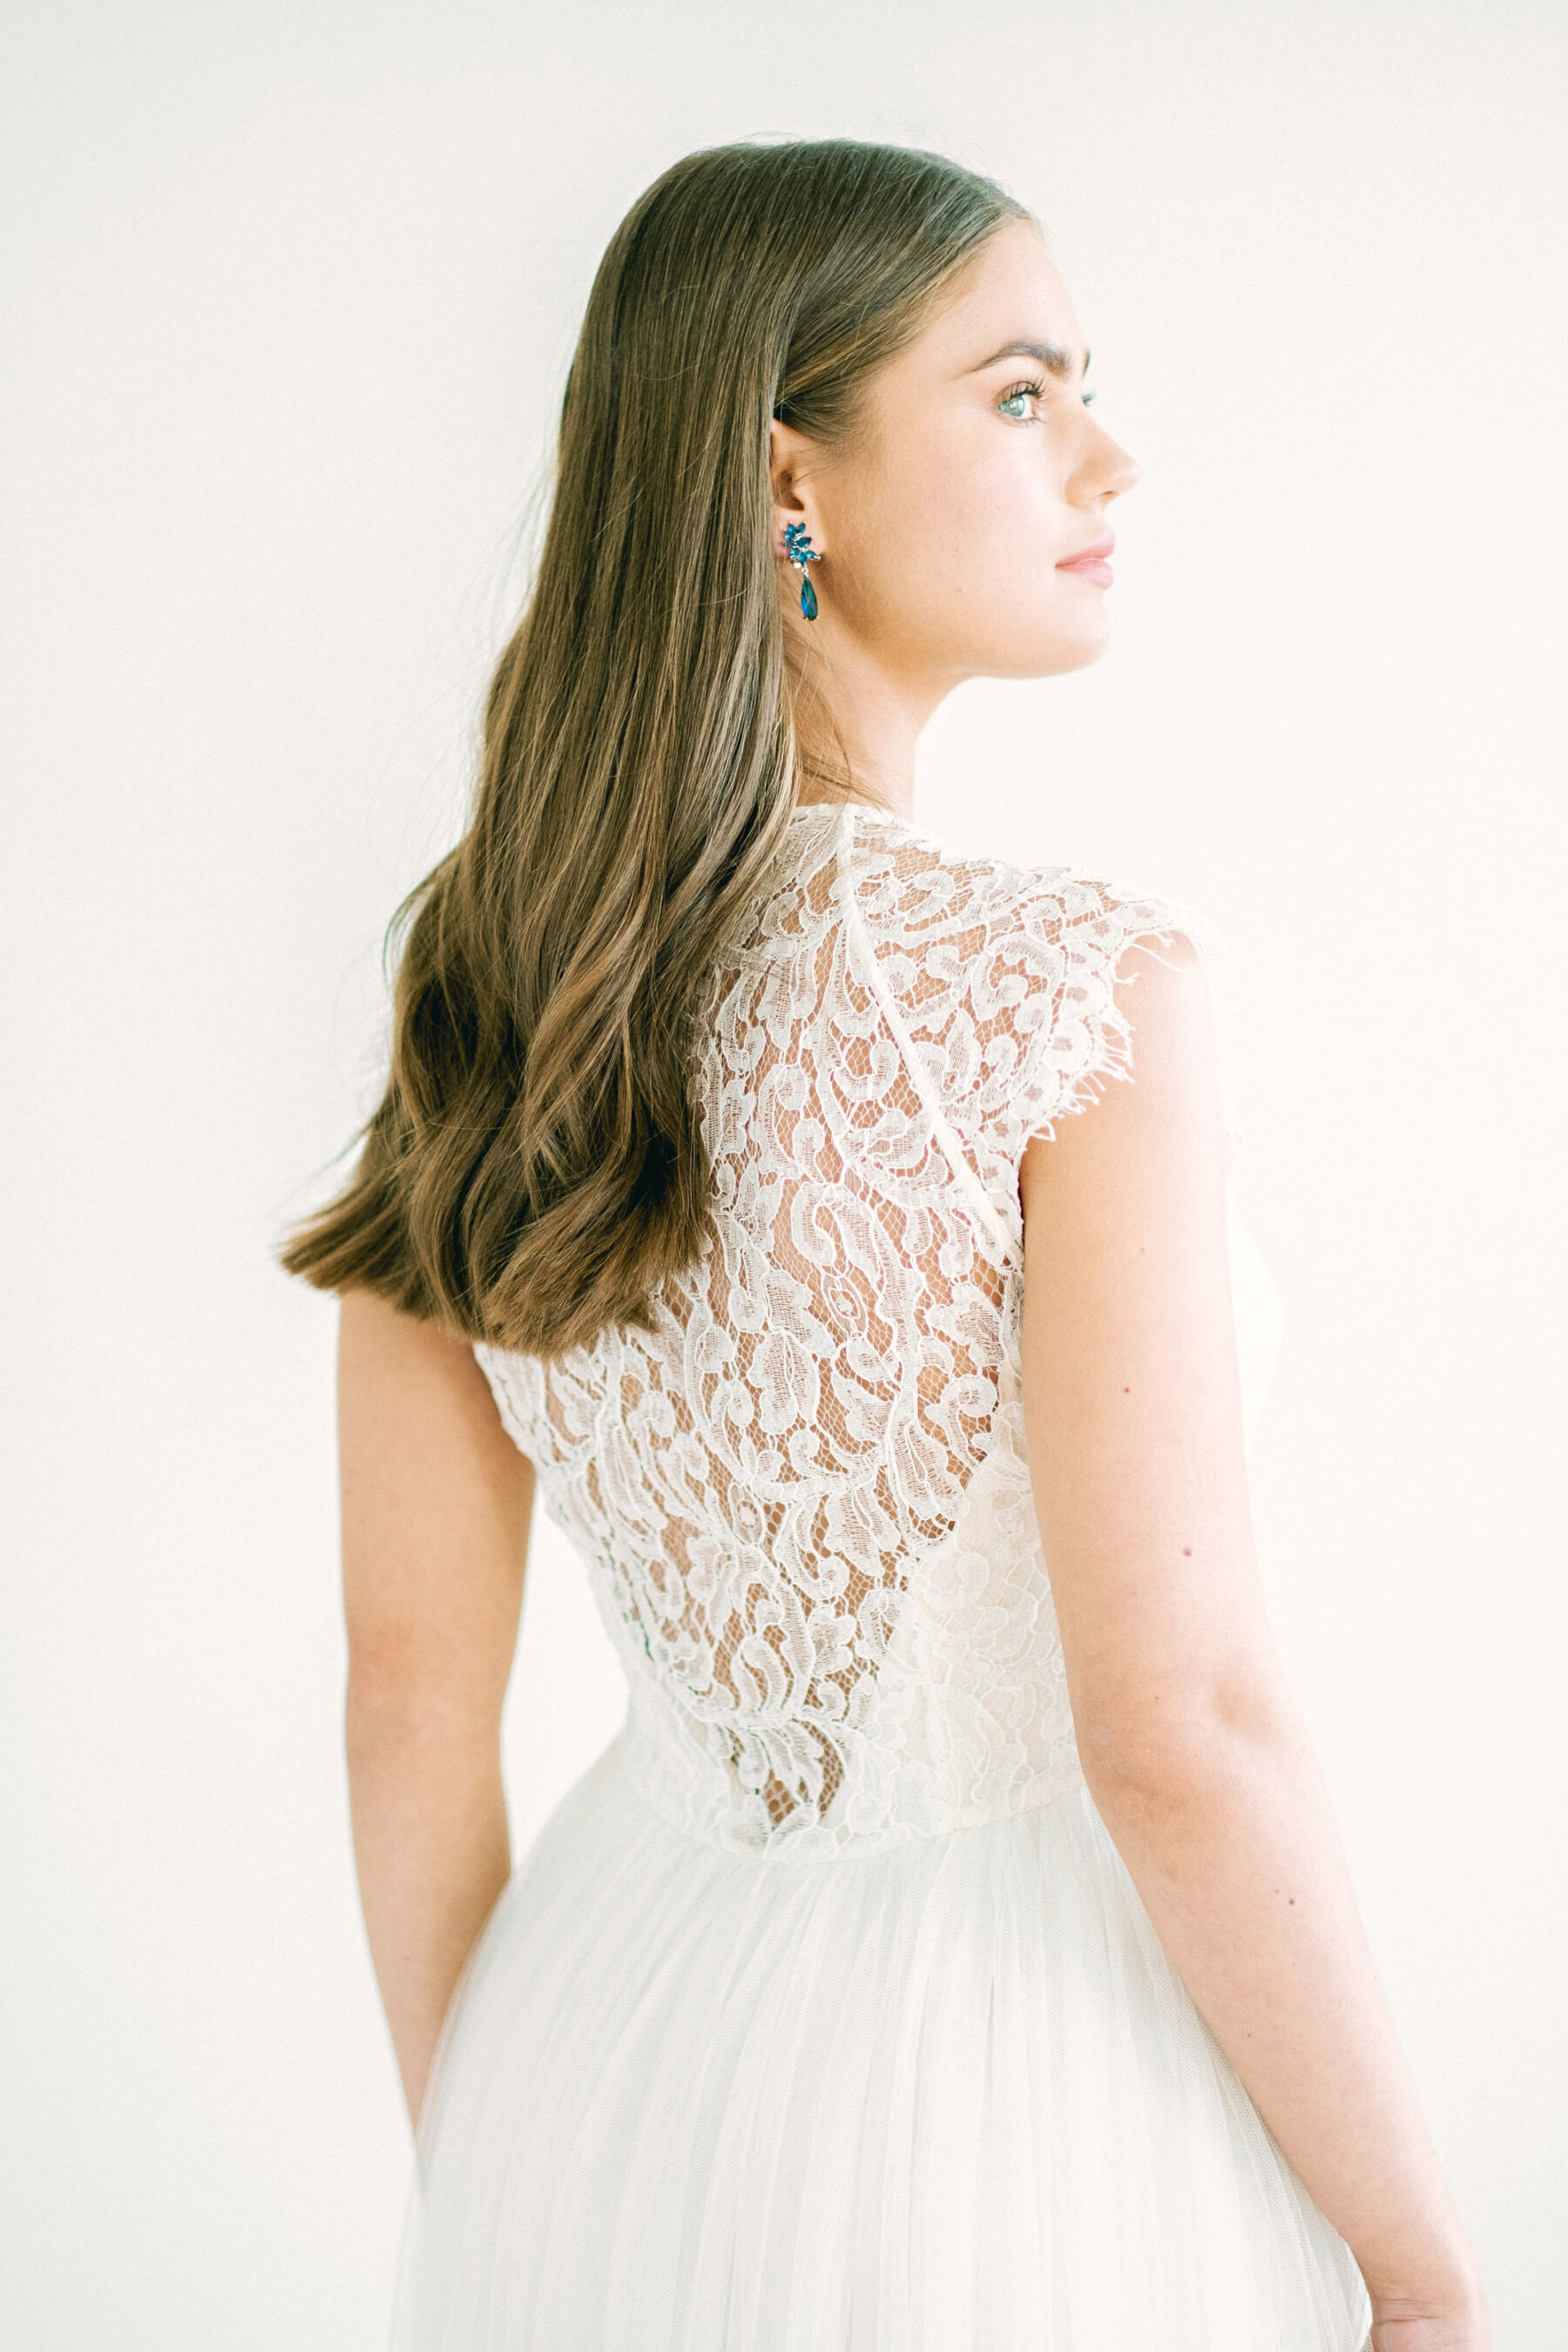 Bride wearing a Kate Beaumont ethical wedding dress with a lace panel at the back.